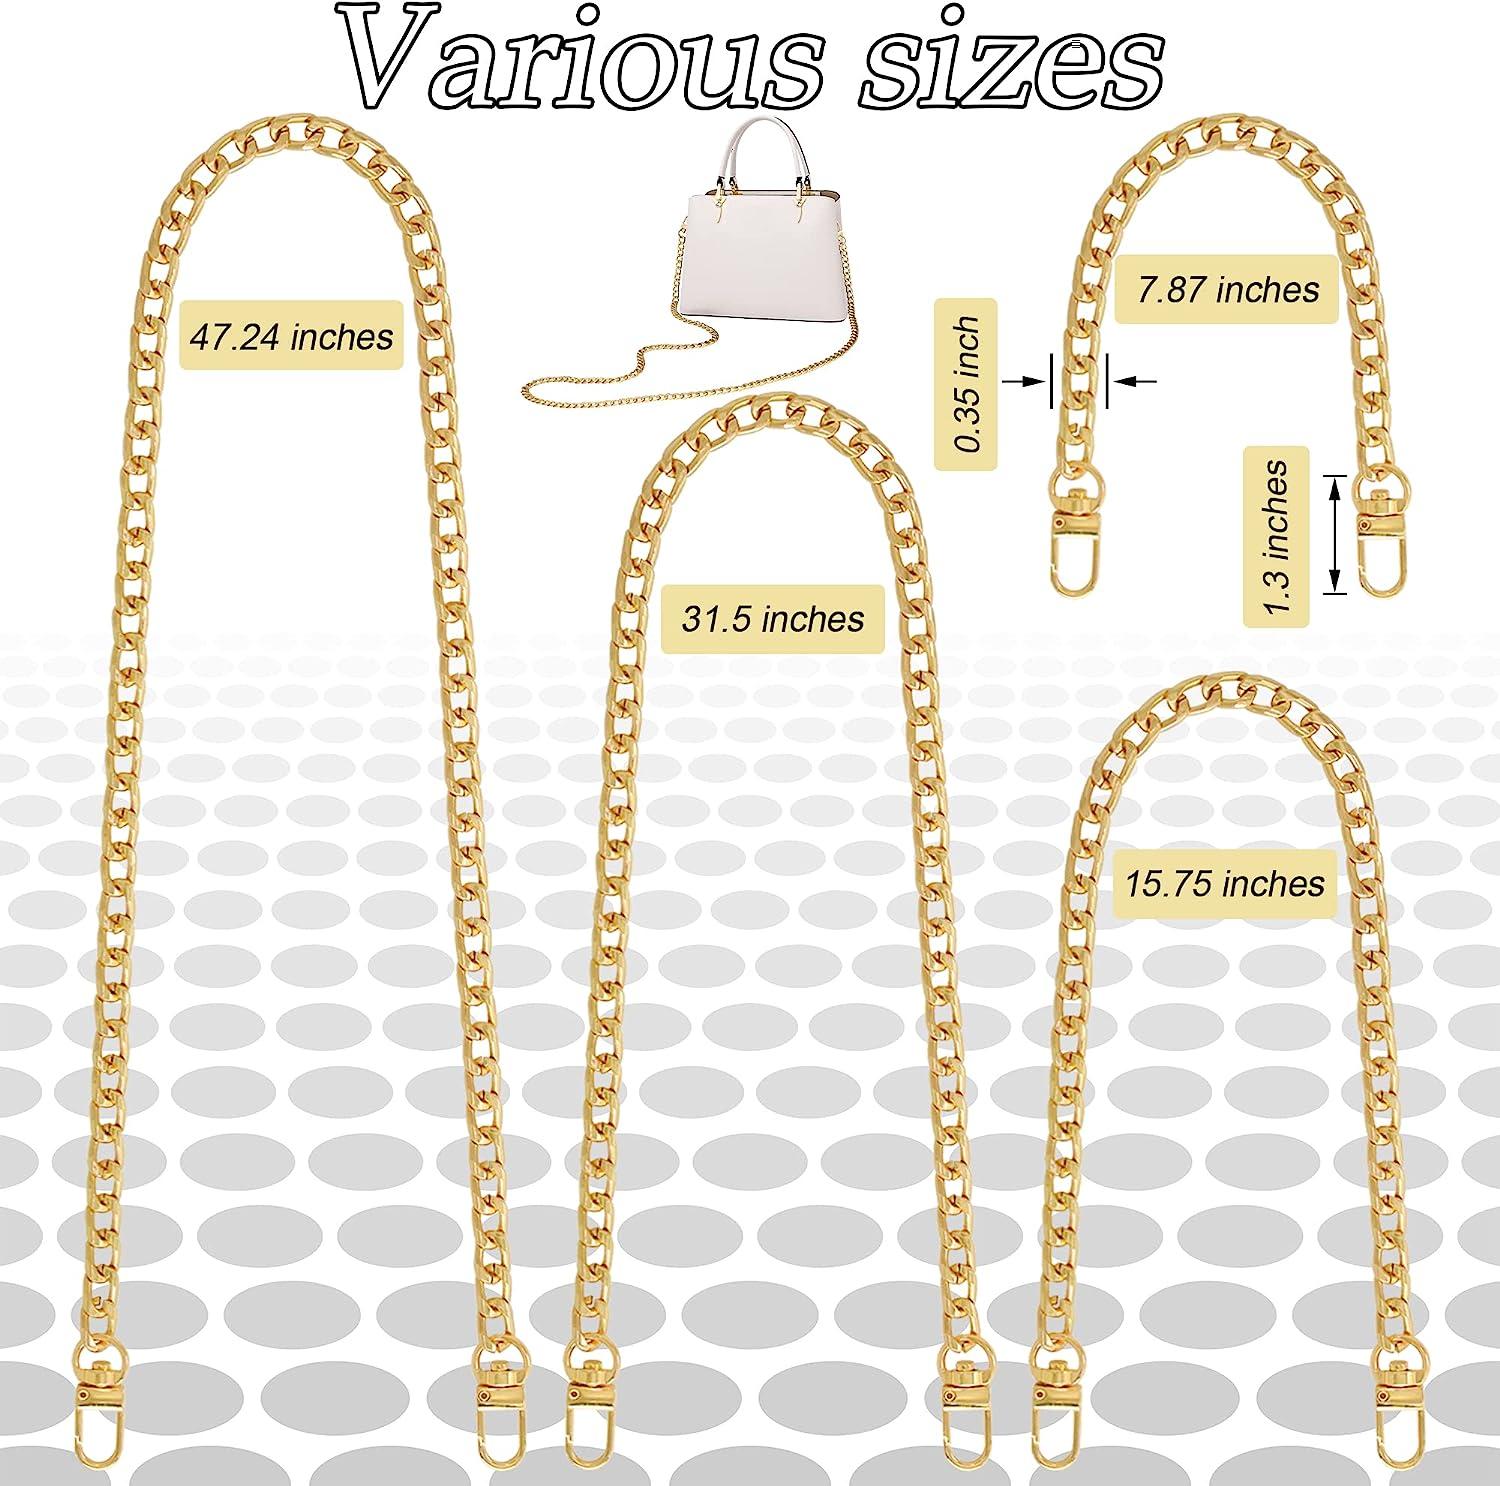 Gondiane 4 Sizes Flat Purse Chain Strap Crossbody Bag Replacement Strap with Metal Buckles(47.2/31.5/15.7/7.9 Inches, Gold)